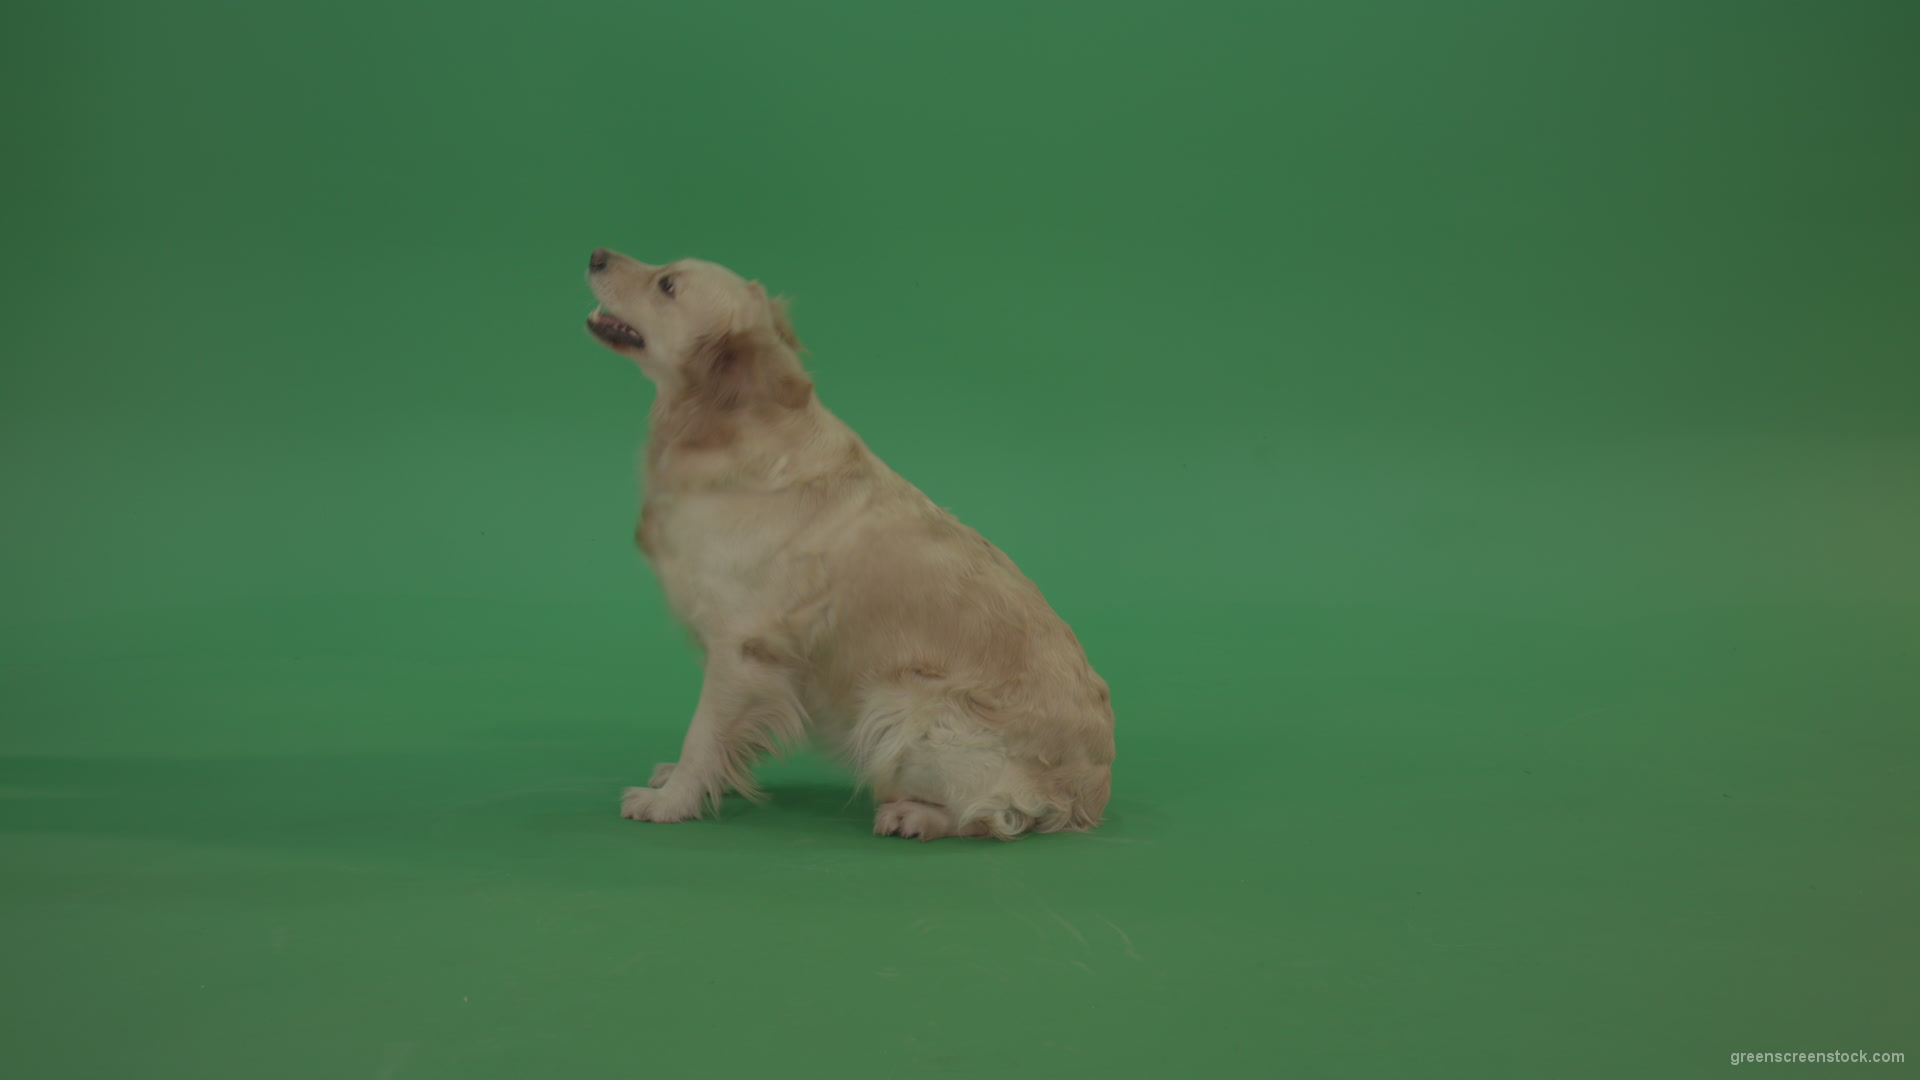 Golden-Retriever-green-screen-dog-in-side-view-barking-isolated-on-chromakey-green-background_002 Green Screen Stock